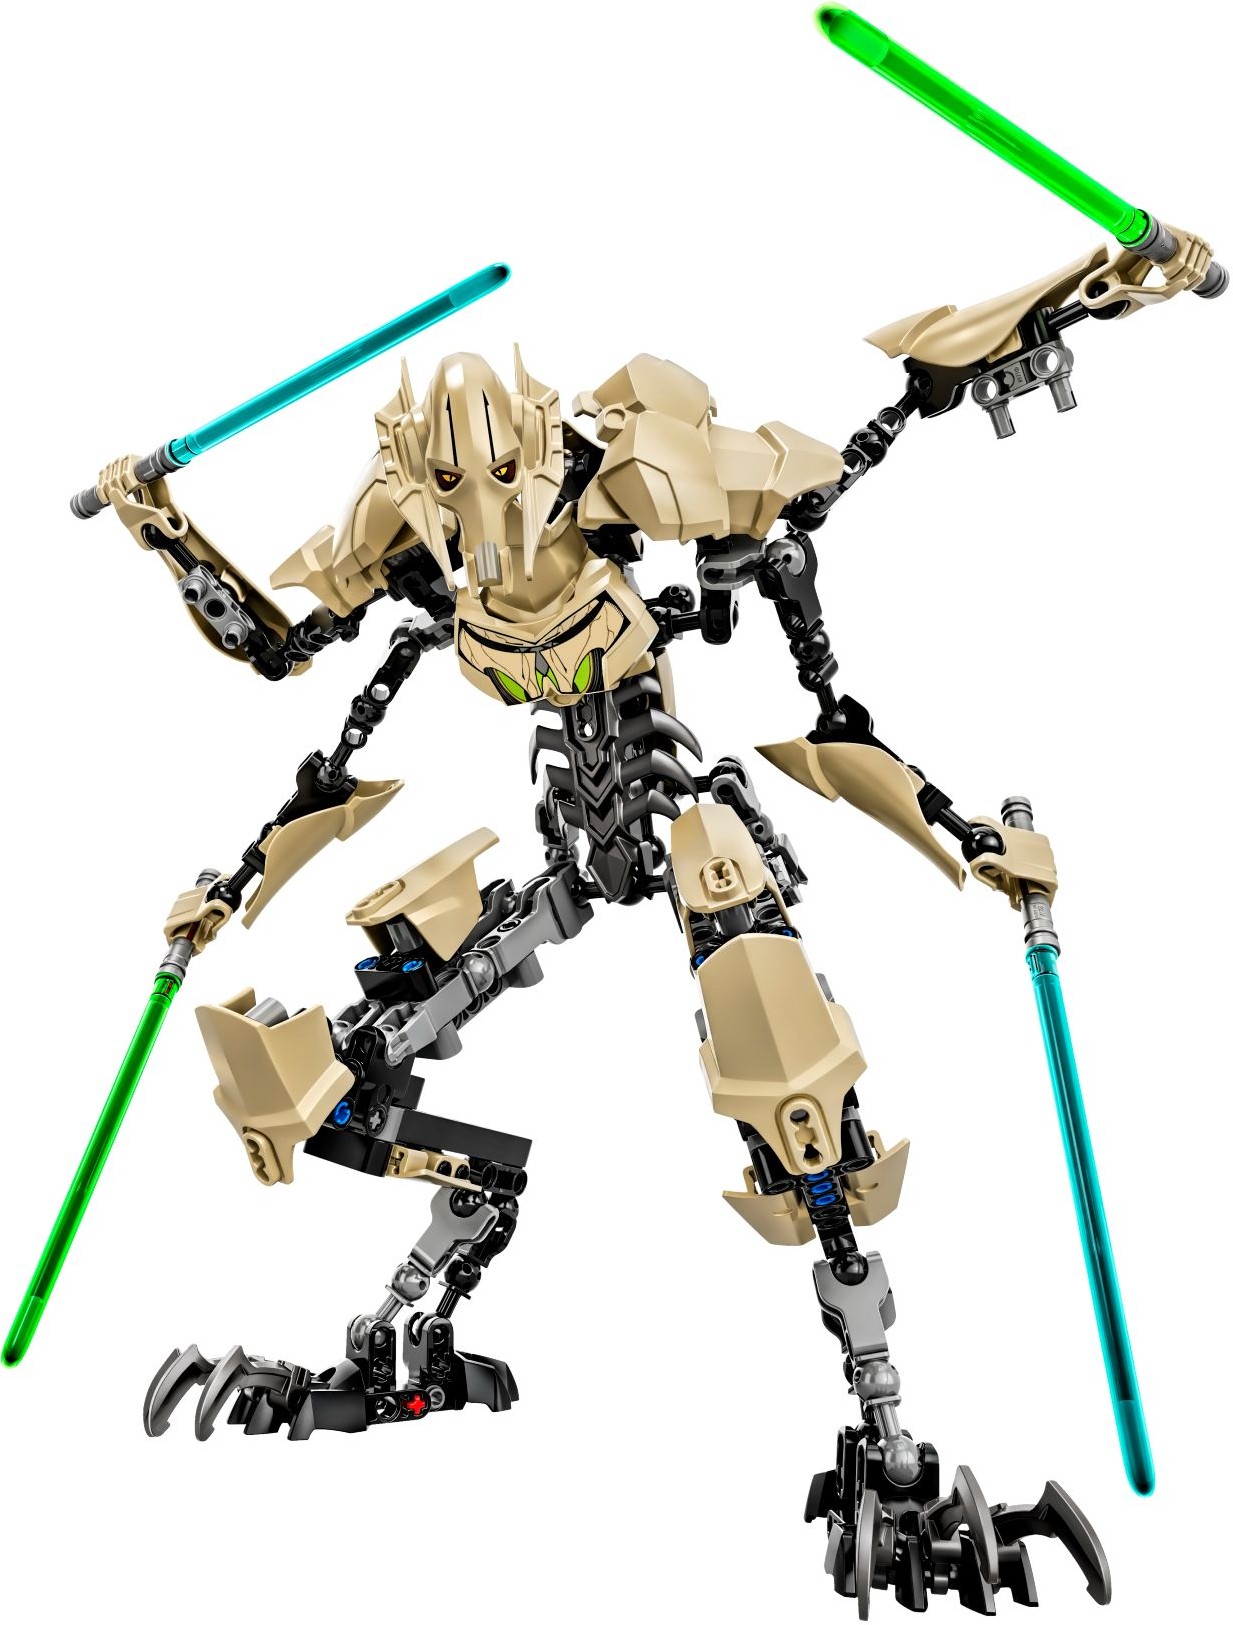 star wars lego buildable figures